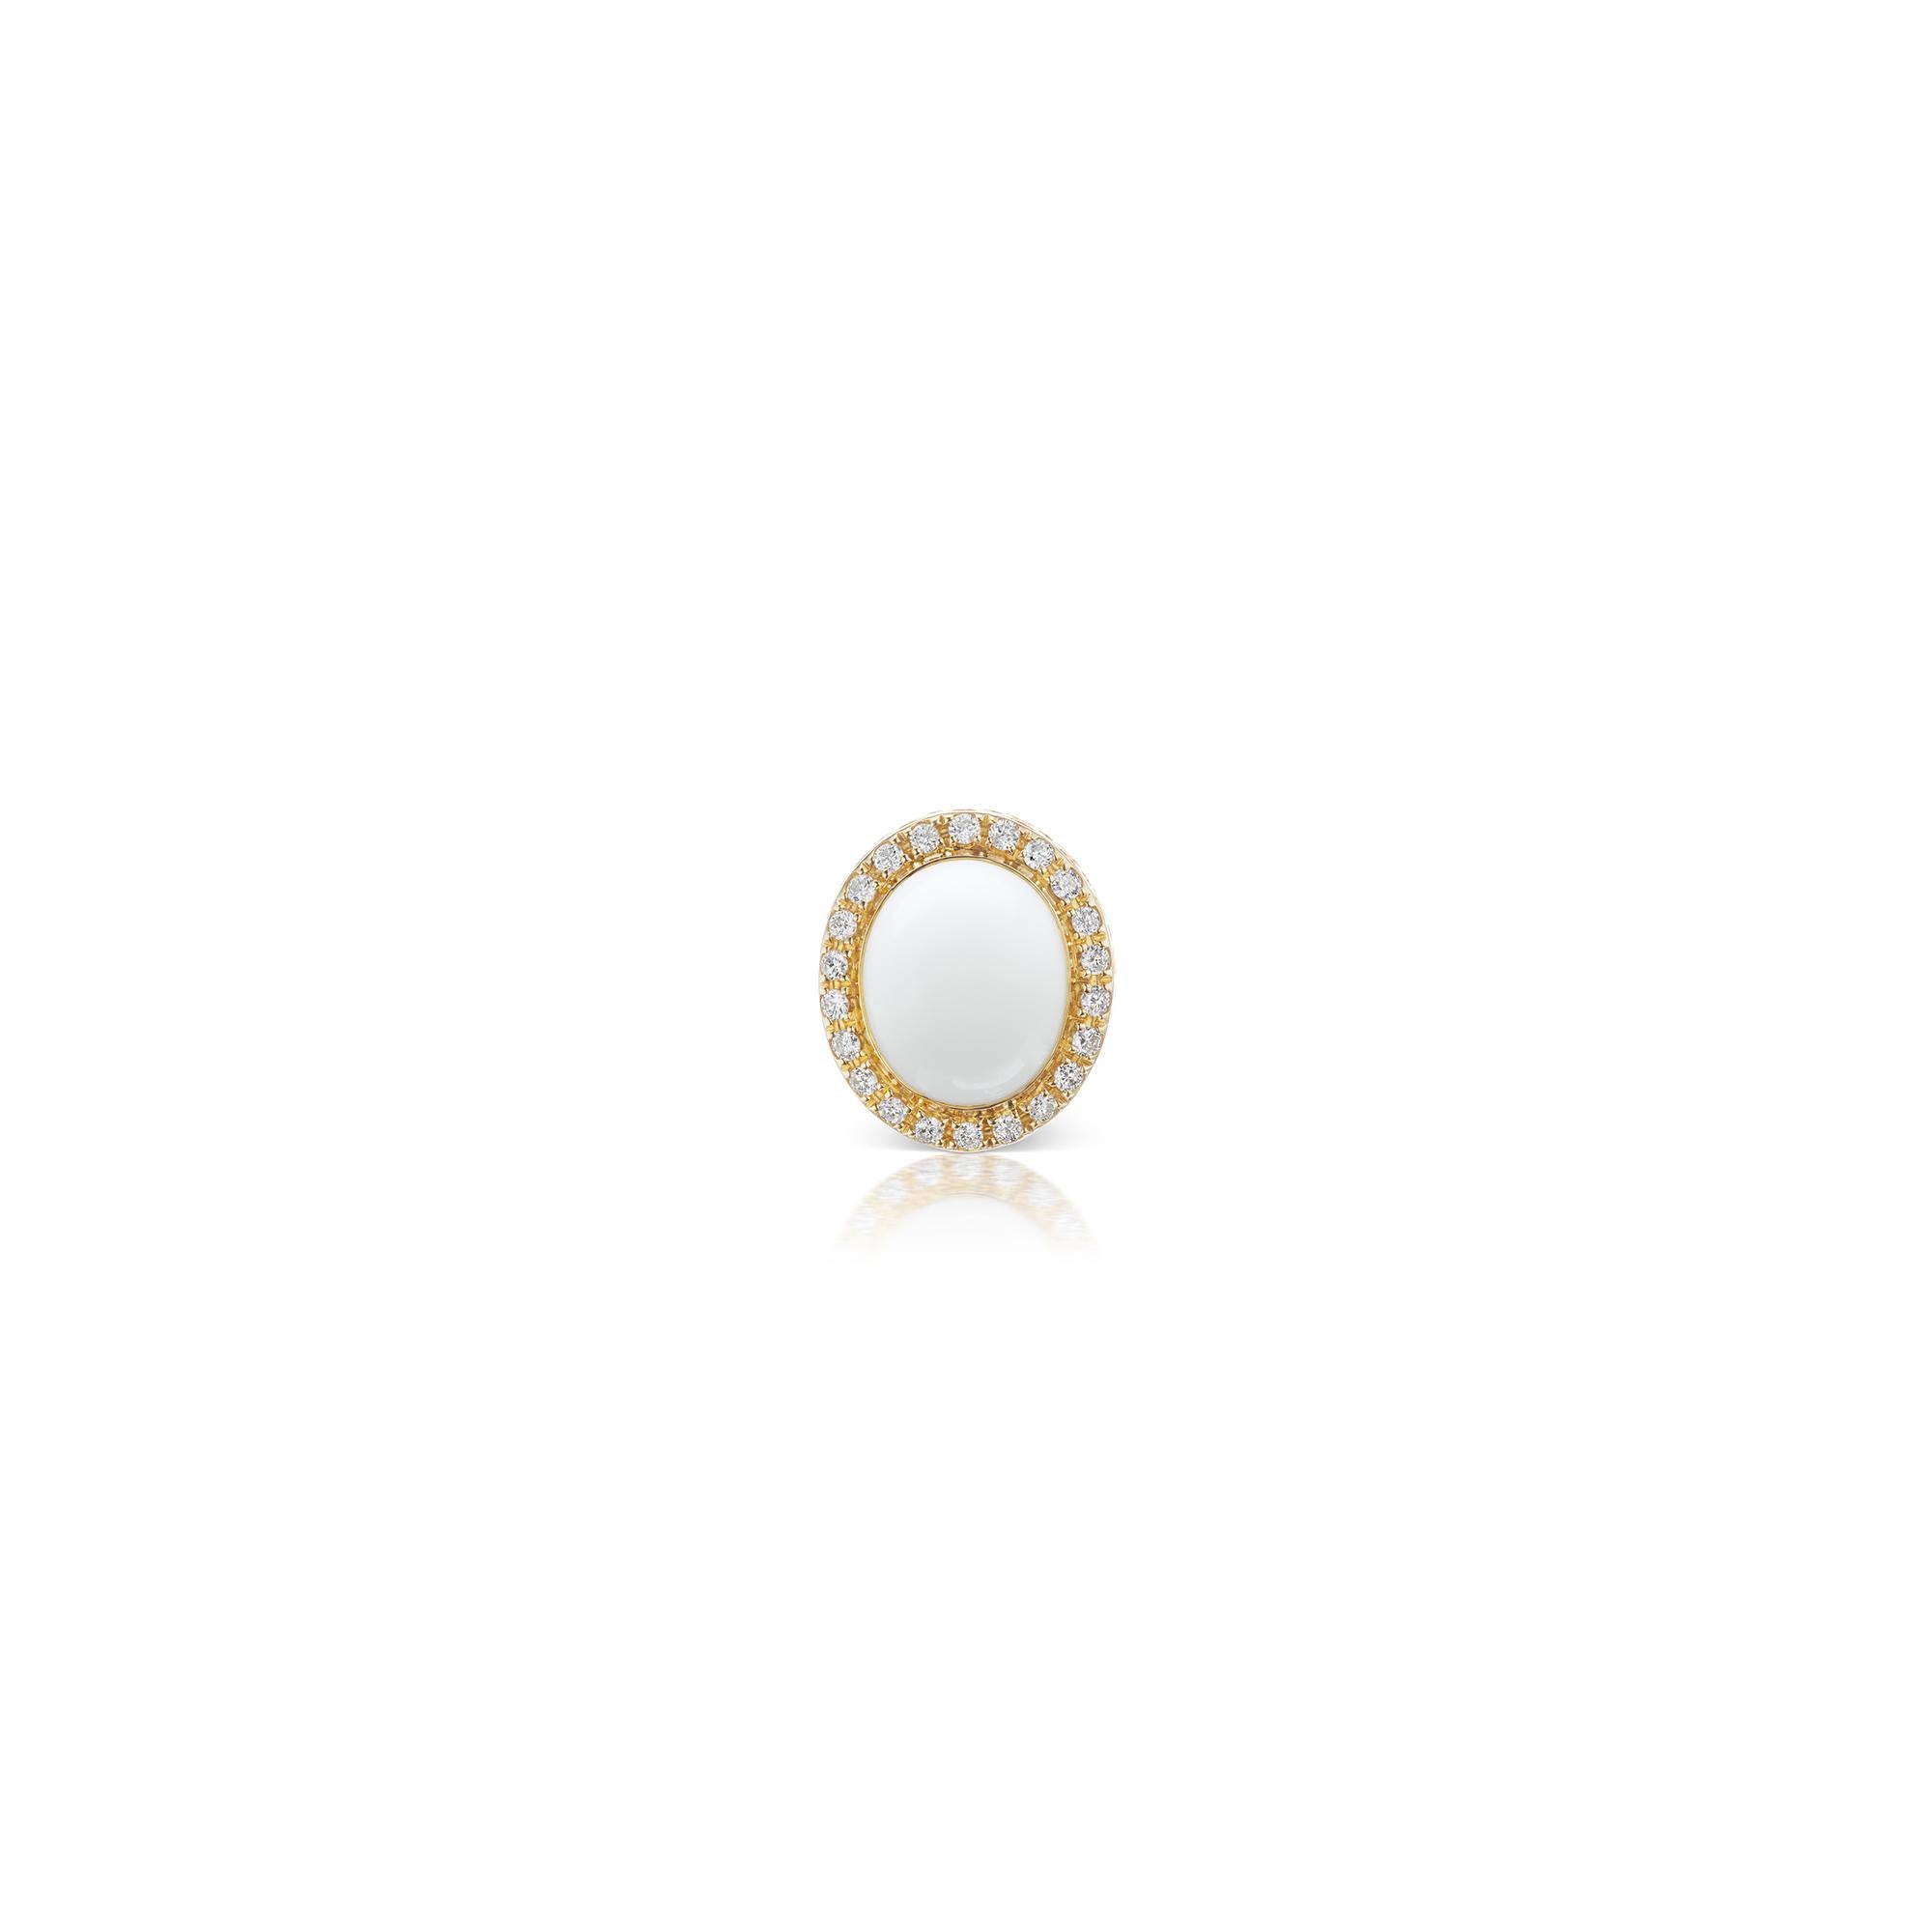 14k YG Large White Onyx Cabochon Studs with Diamond Halo in deep Signature Filigree Bezel (Dia 0.43cts).

Bold white can add just as much pop to an ensemble as any color.  Try these studs to see just how well it can work.